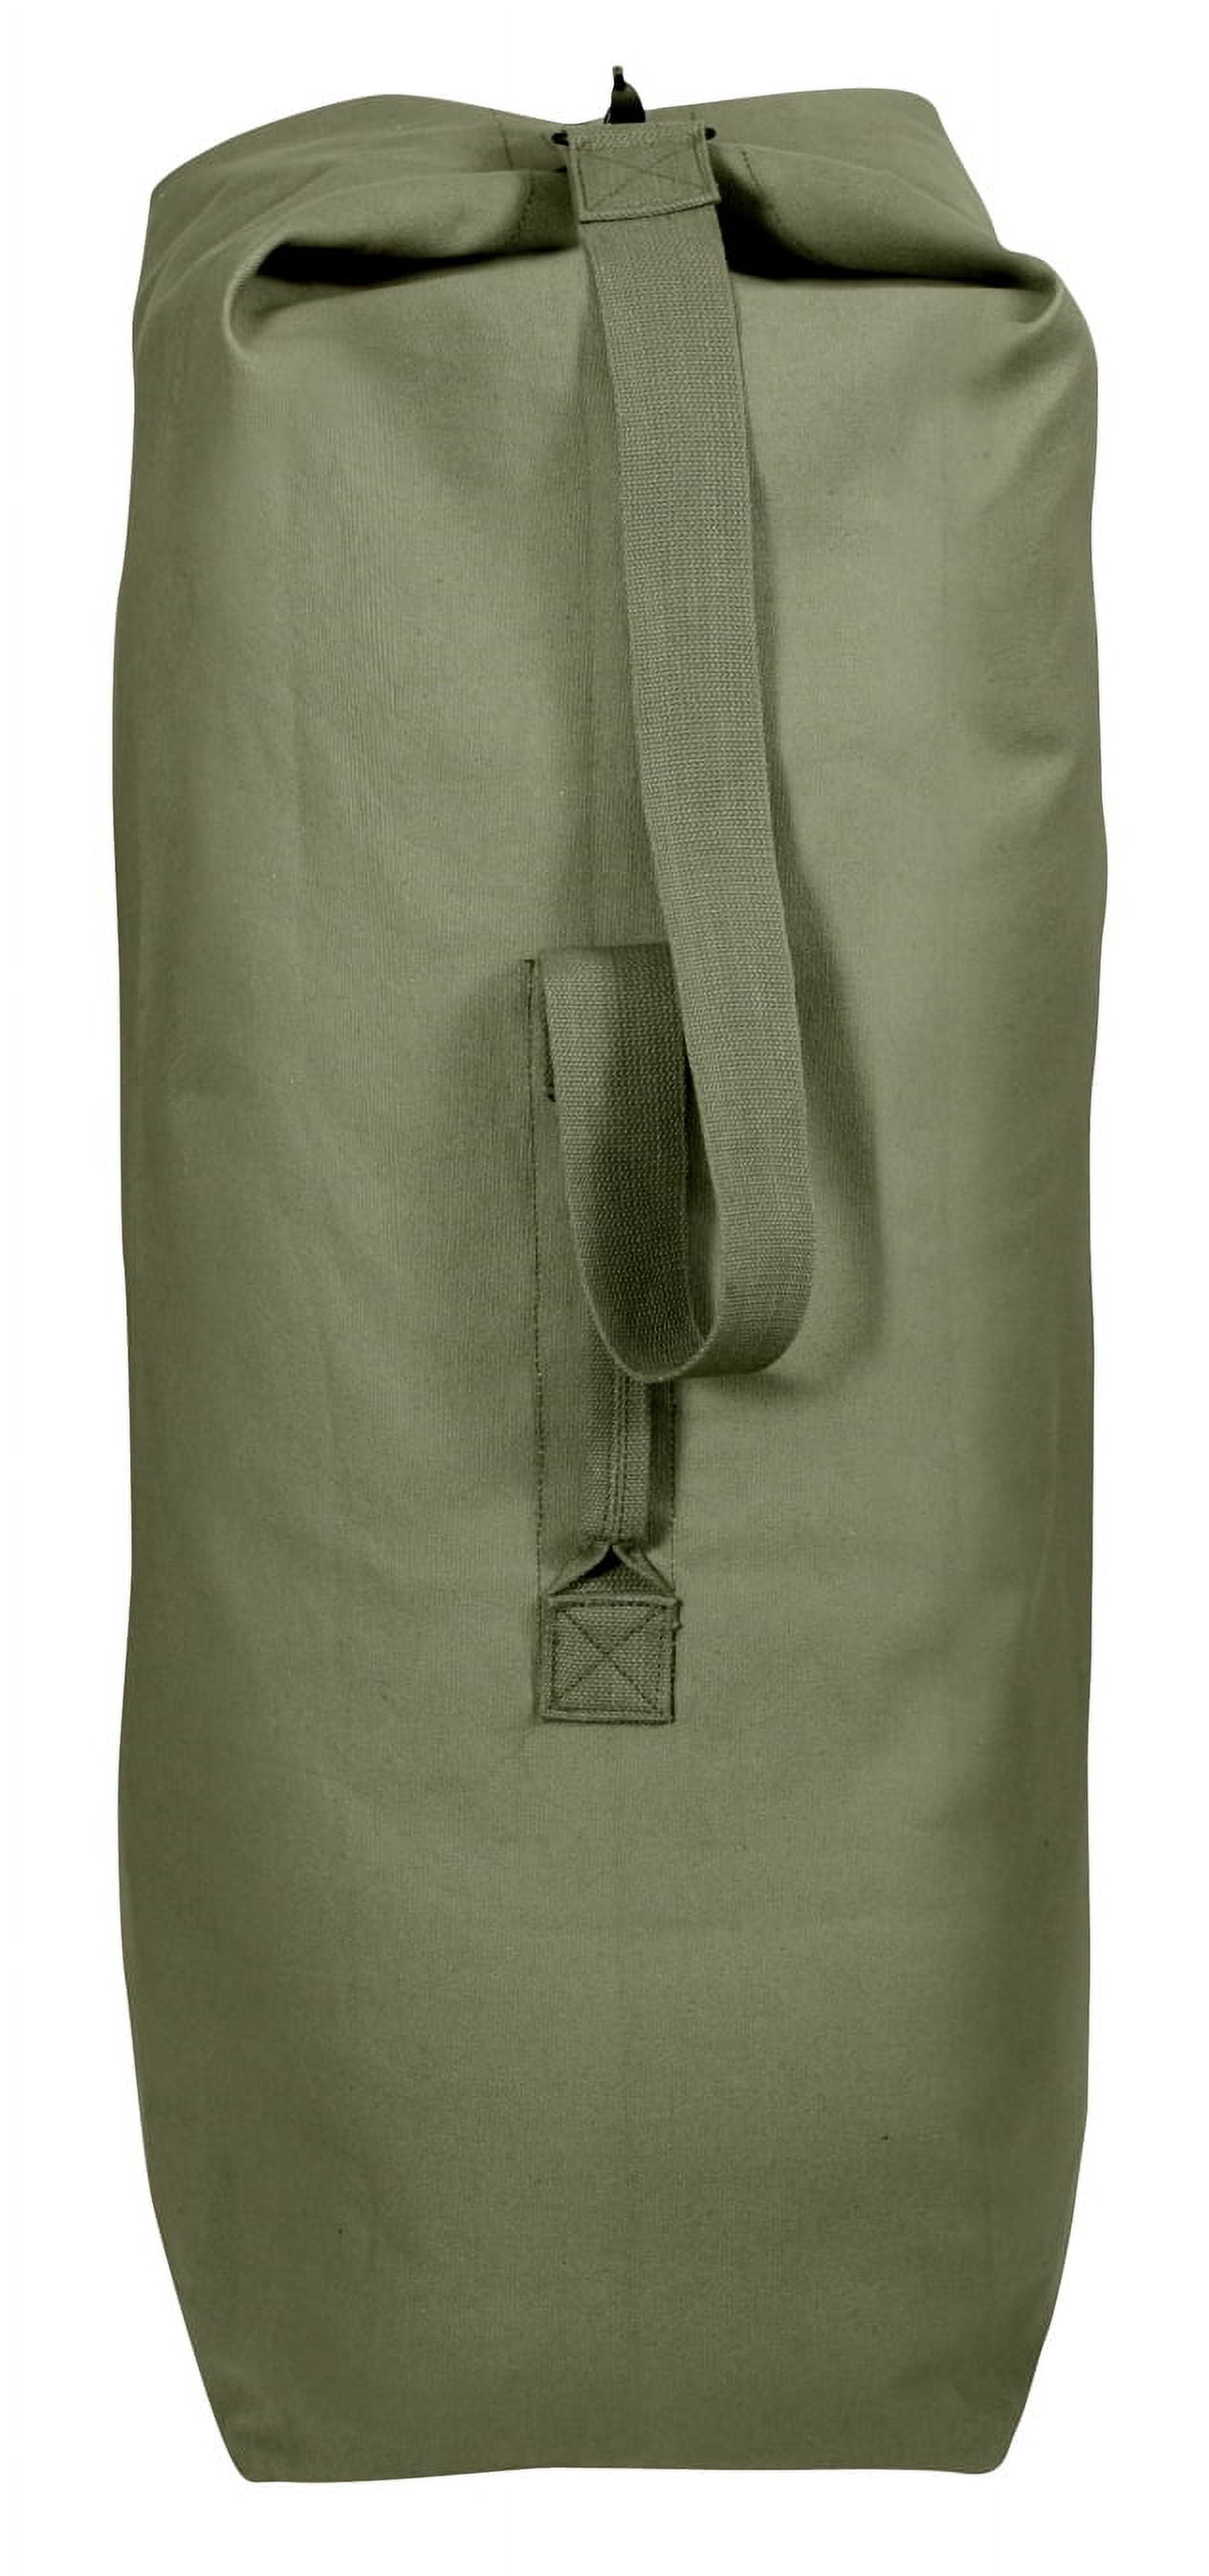 Black - Military Top Load Duffle Bag with Shoulder Strap 25 in. x 42 in. -  Cotton Canvas